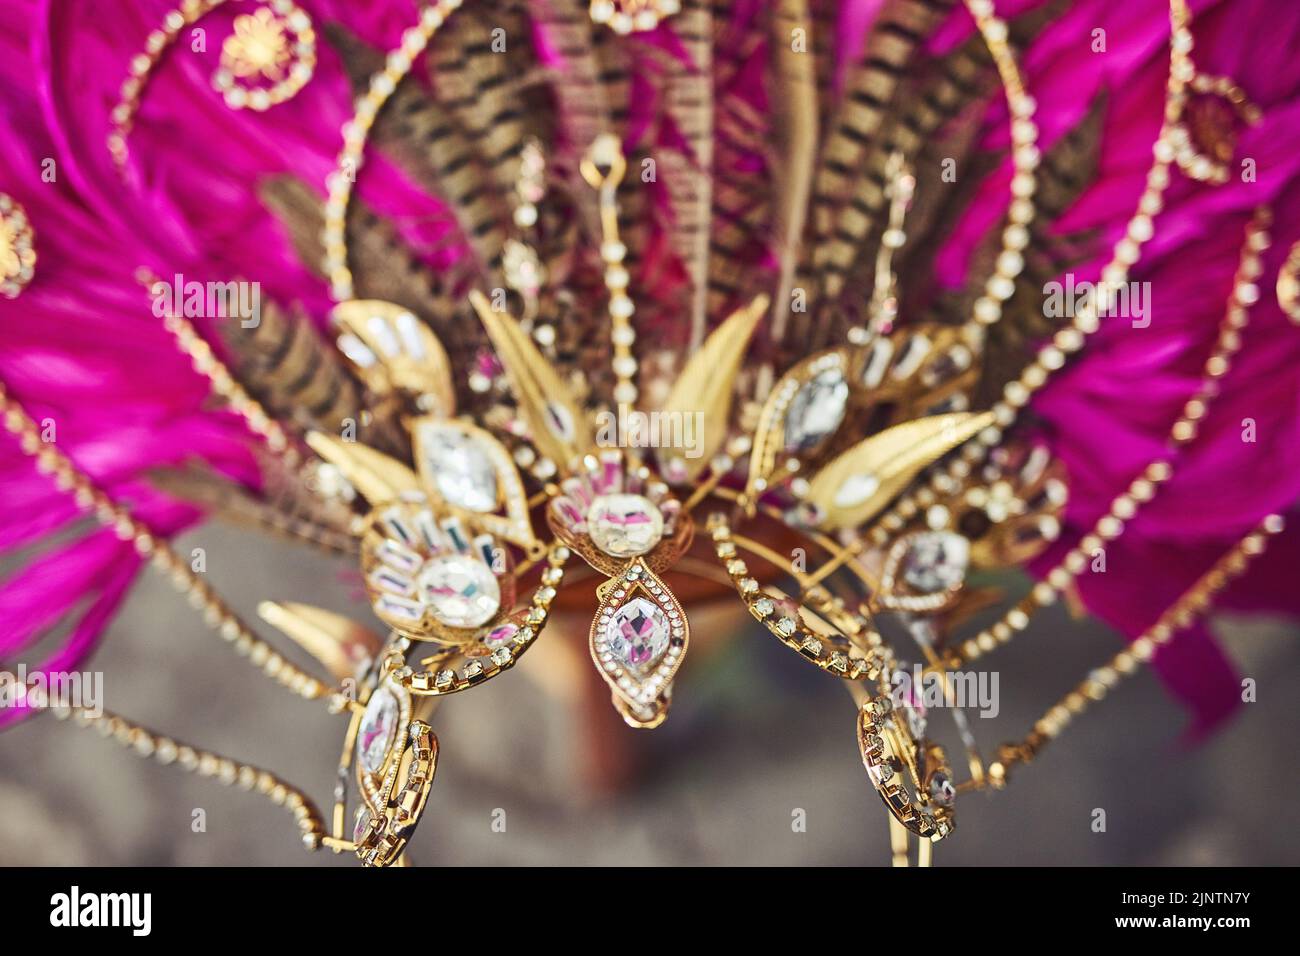 This headpiece will steal the show. Still life shot of costume headwear for a samba dancer. Stock Photo